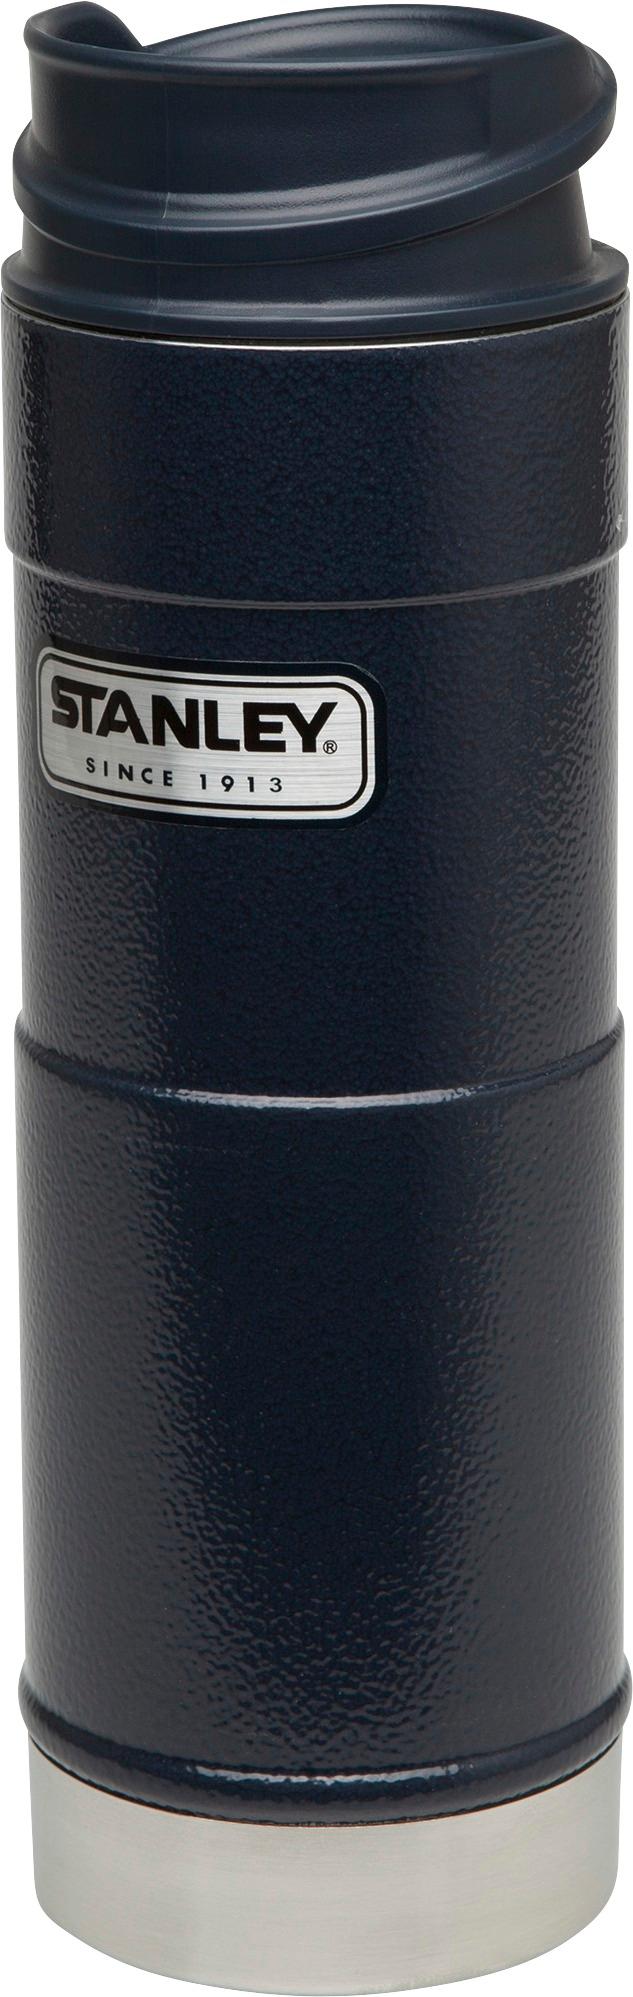 STANLEY DK NAVY BLUE THERMOS 1.1 QT CLASSIC BUILT FOR LIFE SINCE 1913 NO CUP